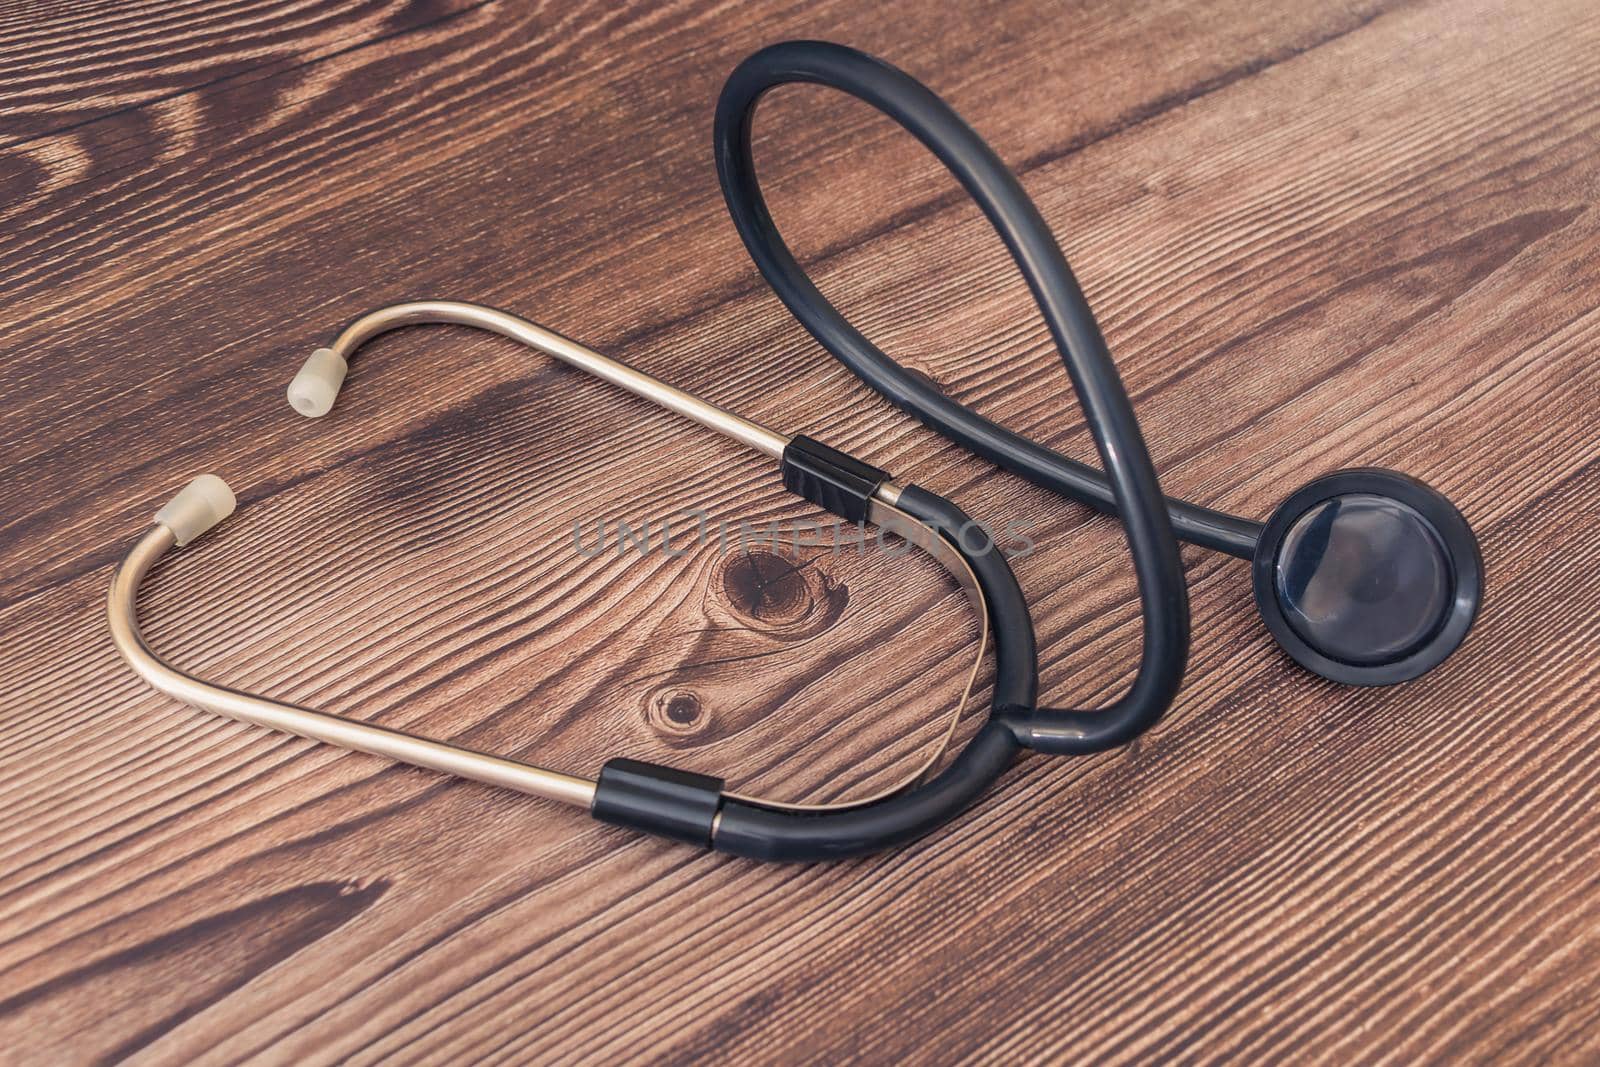 Medical stethoscope for the diagnosis of human heartbeat and breathing